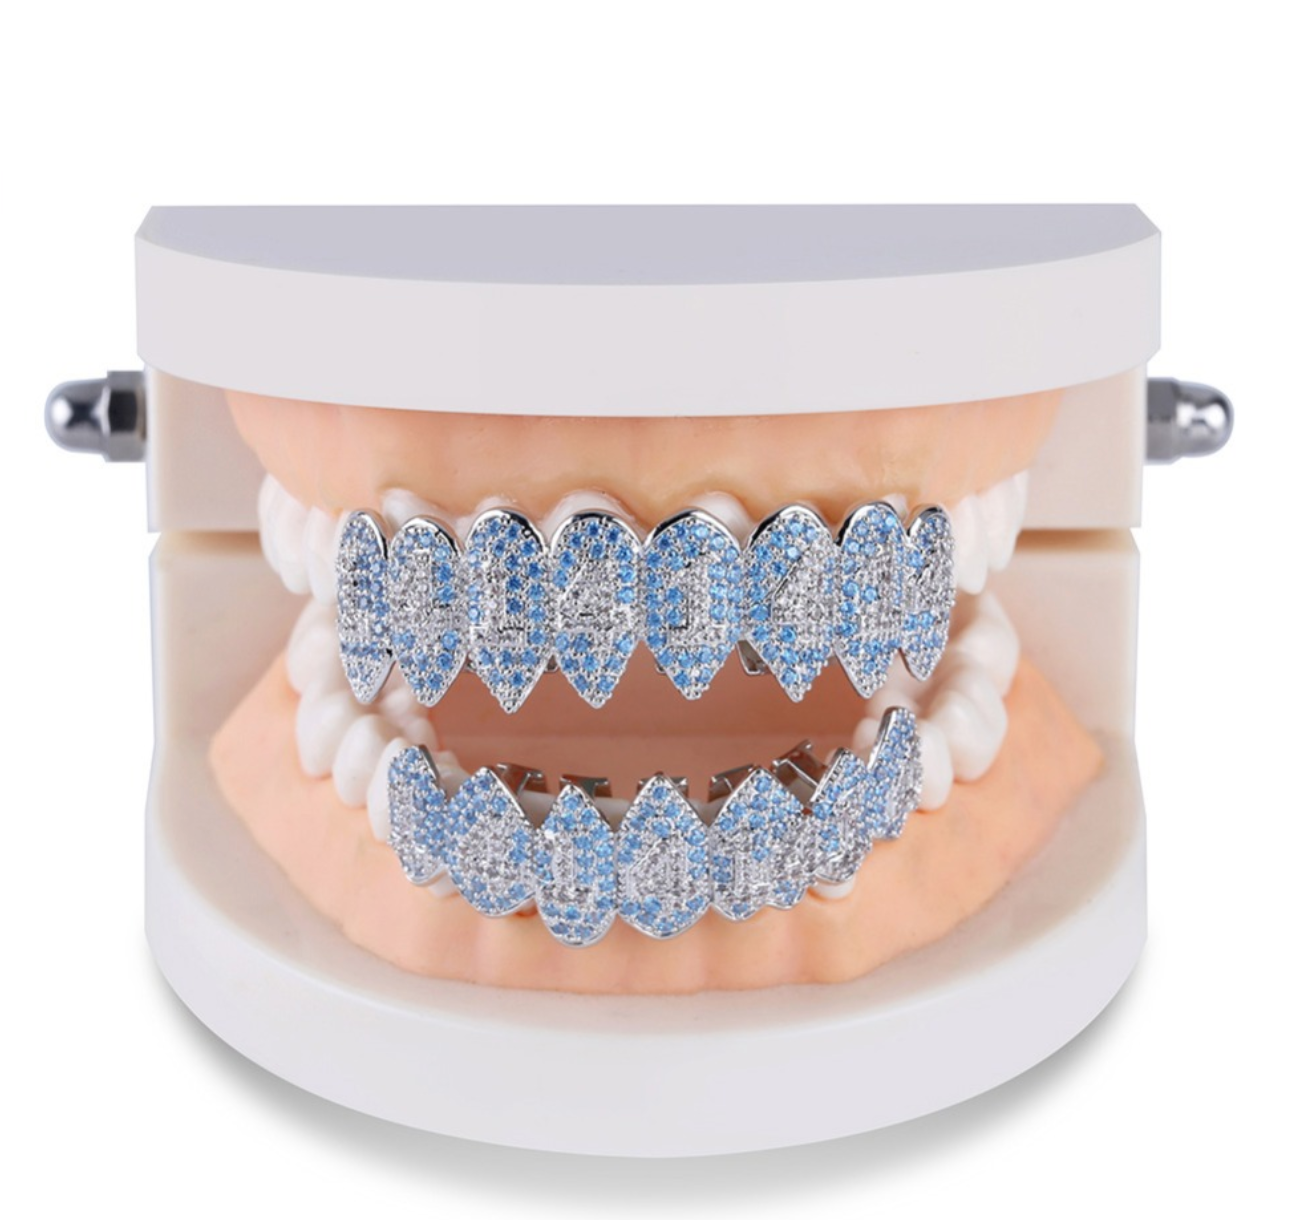 Blue Grillz Diamond Grillz Iced Out Vampire Fangs Grillz Hip Hop Rapper Jewelry Grills